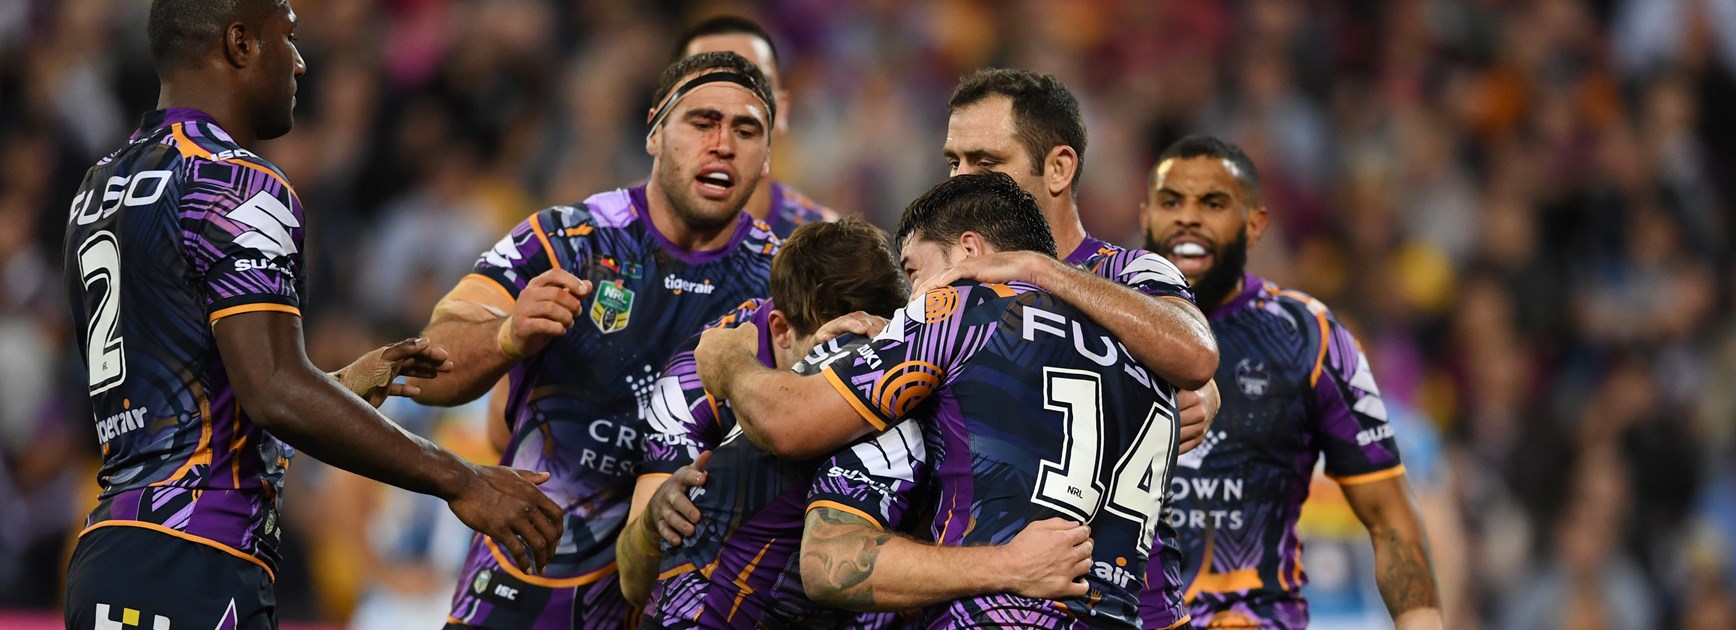 Melbourne Storm's road to grand final